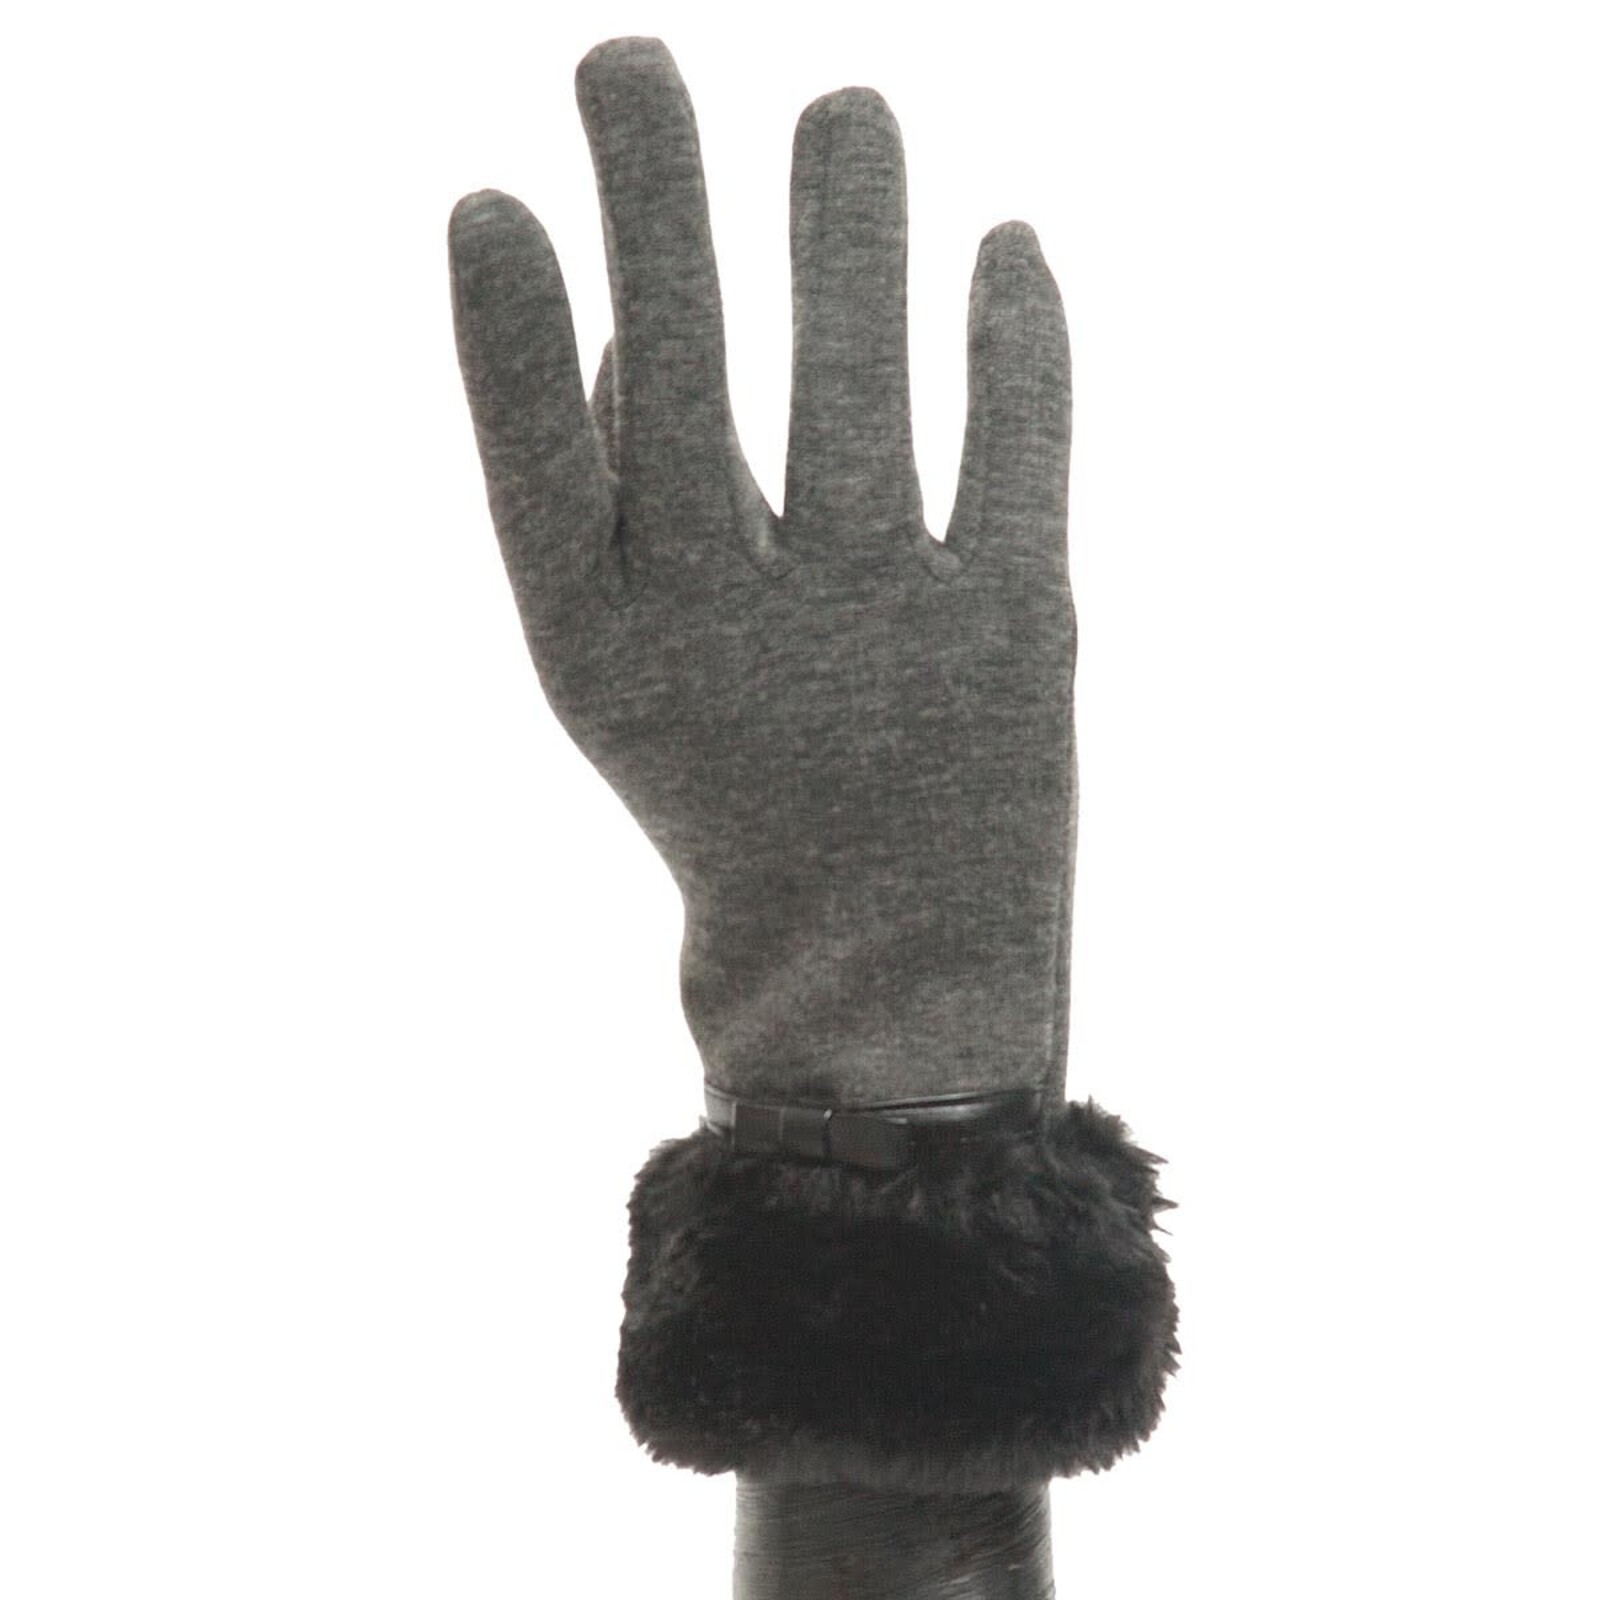 Trezo Grey Glove with Fur and Bow   X7921 loading=